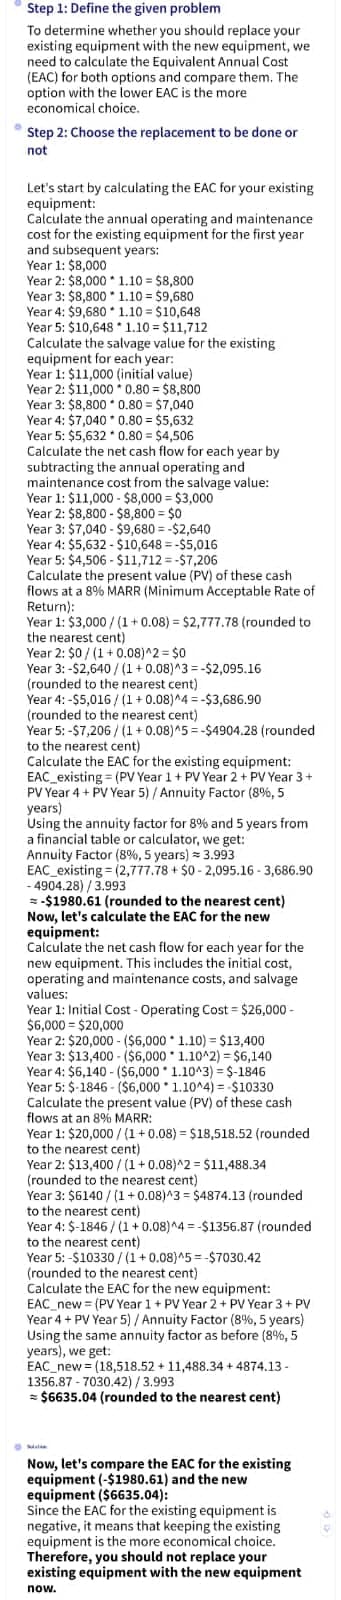 Step 1: Define the given problem
To determine whether you should replace your
existing equipment with the new equipment, we
need to calculate the Equivalent Annual Cost
(EAC) for both options and compare them. The
option with the lower EAC is the more
economical choice.
Step 2: Choose the replacement to be done or
not
Let's start by calculating the EAC for your existing
equipment:
Calculate the annual operating and maintenance
cost for the existing equipment for the first year
and
and subsequent years:
Year 1: $8,000
Year 2: $8,000
1.10 $8,800
Year 3: $8,800
1.10 = $9,680
Year 4: $9,680 1.10 = $10,648
Year 5: $10,648*1.10 = $11,712
Calculate the salvage value for the existing
equipment for each year:
Year 1: $11,000 (initial value)
Year 2: $11,000 0.80 = $8,800
Year 3: $8,800 0.80 = $7,040
Year 4: $7,040 * 0.80 = $5,632
Year 5: $5,632 * 0.80 = $4,506
Calculate the net cash flow for each year by
subtracting the annual operating and
maintenance cost from the salvage value:
Year 1: $11,000 - $8,000 $3,000
real 1.
Year 2: $8,800-$8,800 = $0
Year 3: $7,040 - $9,680=-$2,640
Year 4: $5,632-$10,648=-$5,016
Wear
Year 5: $4,506-$11,712=-$7,206
Calculate the present value (PV) of these cash
Flore
flows at a 8% MARR (Minimum Acceptable Rate of
Return):
Year 1
Year 1: $3,000/(1+0.08) = $2,777.78 (rounded to
the nearest cent)
the near
Year 2: $0/(1+0.08)^2 = $0
Year 3:-$2,640/(1+0.08)^3=-$2,095.16
(rounded to the nearest cent)
Year 4:-$5,016/(1+0.08)^4 =-$3,686.90
(rounded to the nearest cent)
Year 5:-$7,206/(1+0.08)^5=-$4904.28 (rounded
to the nearest cent)
Calculate the EAC for the existing equipment:
EAC existing (PV Year 1 + PV Year 2 + PV Year 3+
PV Year
Year 4 + PV Year 5) / Annuity Factor (8%, 5
years)
years)
Using the annuity factor for 8% and 5 years from
a financial table or calculator, we get:
Annuity Factor (8%, 5 years) = 3.993
EAC existing (2,777.78 + $0-2,095.16-3,686.90
-4904.28)/3.993
=-$1980.61 (rounded to the nearest cent)
Now, let's calculate the EAC for the new
equipment:
Calculate the net cash flow for each year for the
cance
new equipment. This includes the initial cost,
operating and maintenance costs, and salvage
values:
Year 1: Initial Cost - Operating Cost-$26,000-
$6,000-$20,000
Year 2: $20,000 - ($6,000
Year 3: $13,400 - ($6,000
Year 4: $6,140- ($6,000
Year 5: $-1846-($6,000 1.10^4) = -$10330
Calculate the present value (PV) of these cash
flows at an 8% MARR:
1.10) = $13,400
1.10^2) = $6,140
1.10^3) =$-1846
MAN
Year 1: $20,000/(1+0.08) = $18,518.52 (rounded.
real 1.920,000
to the nearest cent)
Year 2: $13,400/(1+0.08)^2 = $11,488.34
(rounded to the nearest cent)
Year 3: $6140/(1+0.08)^3 = $4874.13 (rounded
to the nearest cent)
Year 4: $-1846/(1+0.08)^4 =-$1356.87 (rounded
to the nearest cent)
Year 5:-$10330/(1+0.08)^5=-$7030.42
(rounded to the nearest cent).
Calculate the EAC for the new equipment:
EAC new (PV Year 1 + PV Year 2 + PV Year 3 + PV
Year 4+ PV Year 5) / Annuity Factor (8%, 5 years)
Using the same annuity factor as before (8%, 5
years), we get:
EAC new (18,518.52 + 11,488.34 +4874.13 -
1356.87-7030.42)/3.993
= $6635.04 (rounded to the nearest cent)
Now, let's compare the EAC for the existing
equipment (-$1980.61) and the new
equipment ($6635.04):
Since the EAC for the existing equipment is
negative, it means that keeping the existing
equipment is the more economical choice.
Therefore, you should not replace your
existing equipment with the new equipment
now.